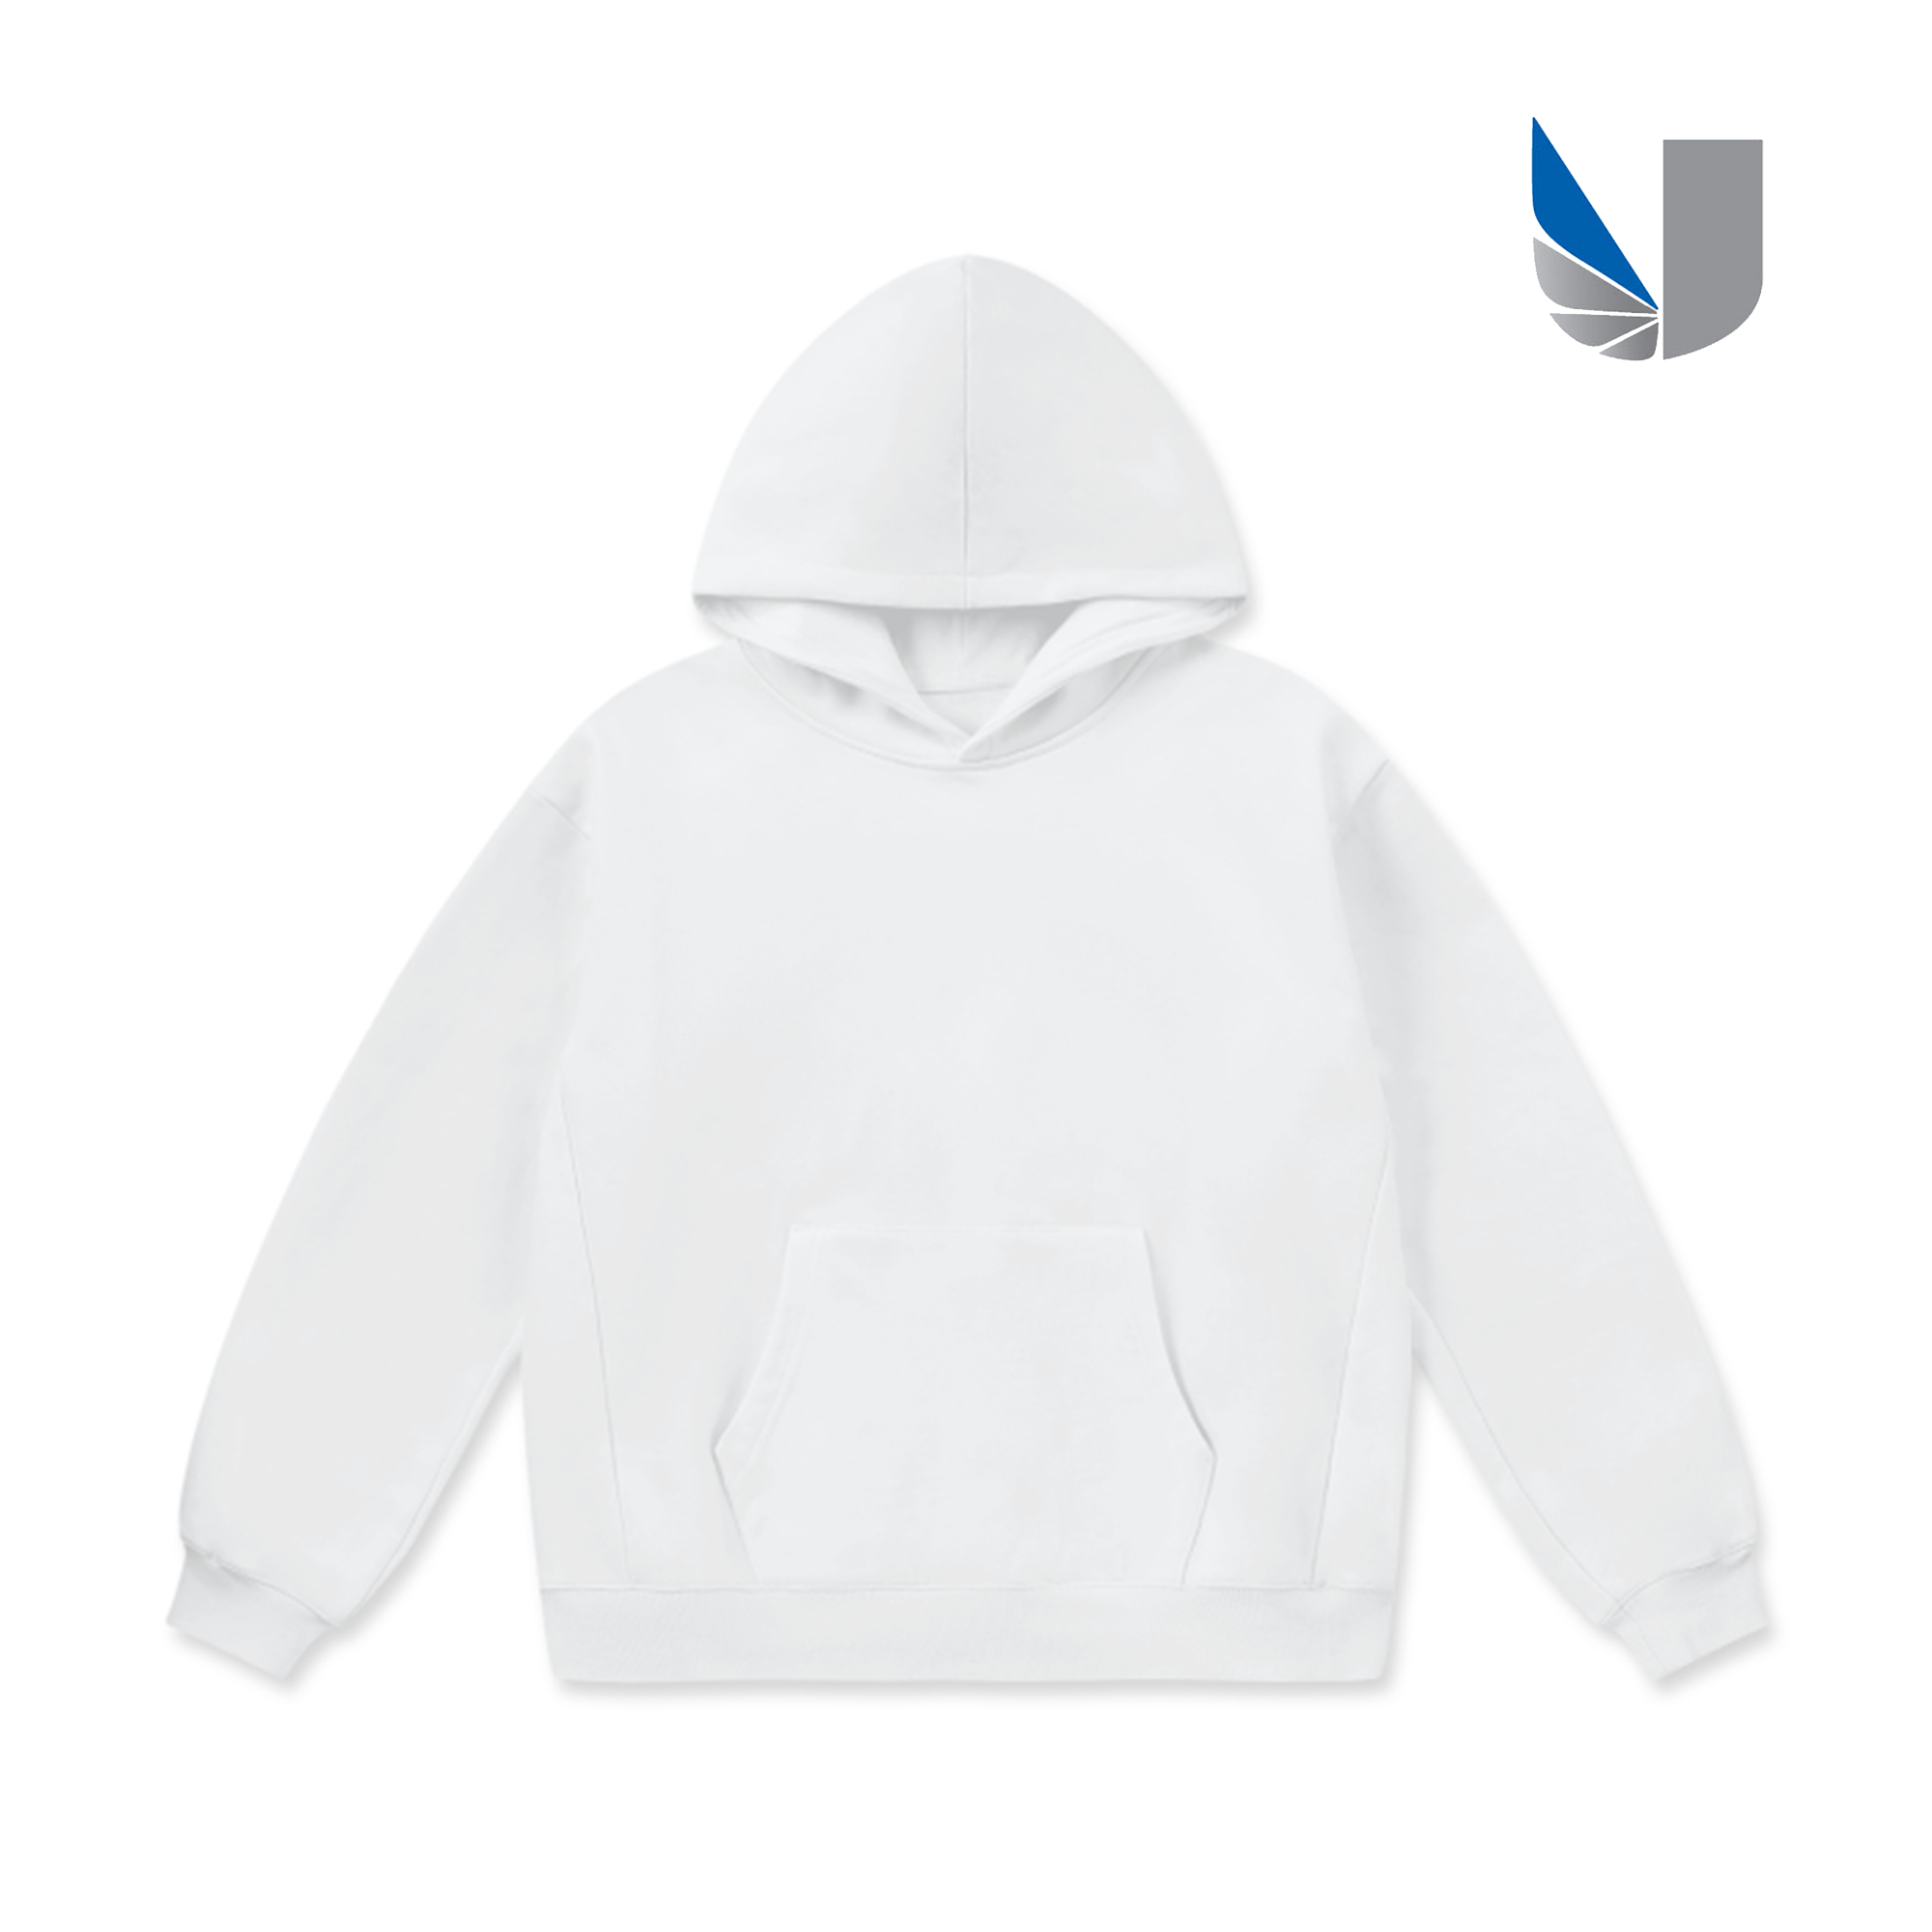 LCC Super Weighted Hoodie - University of West London (Classic)